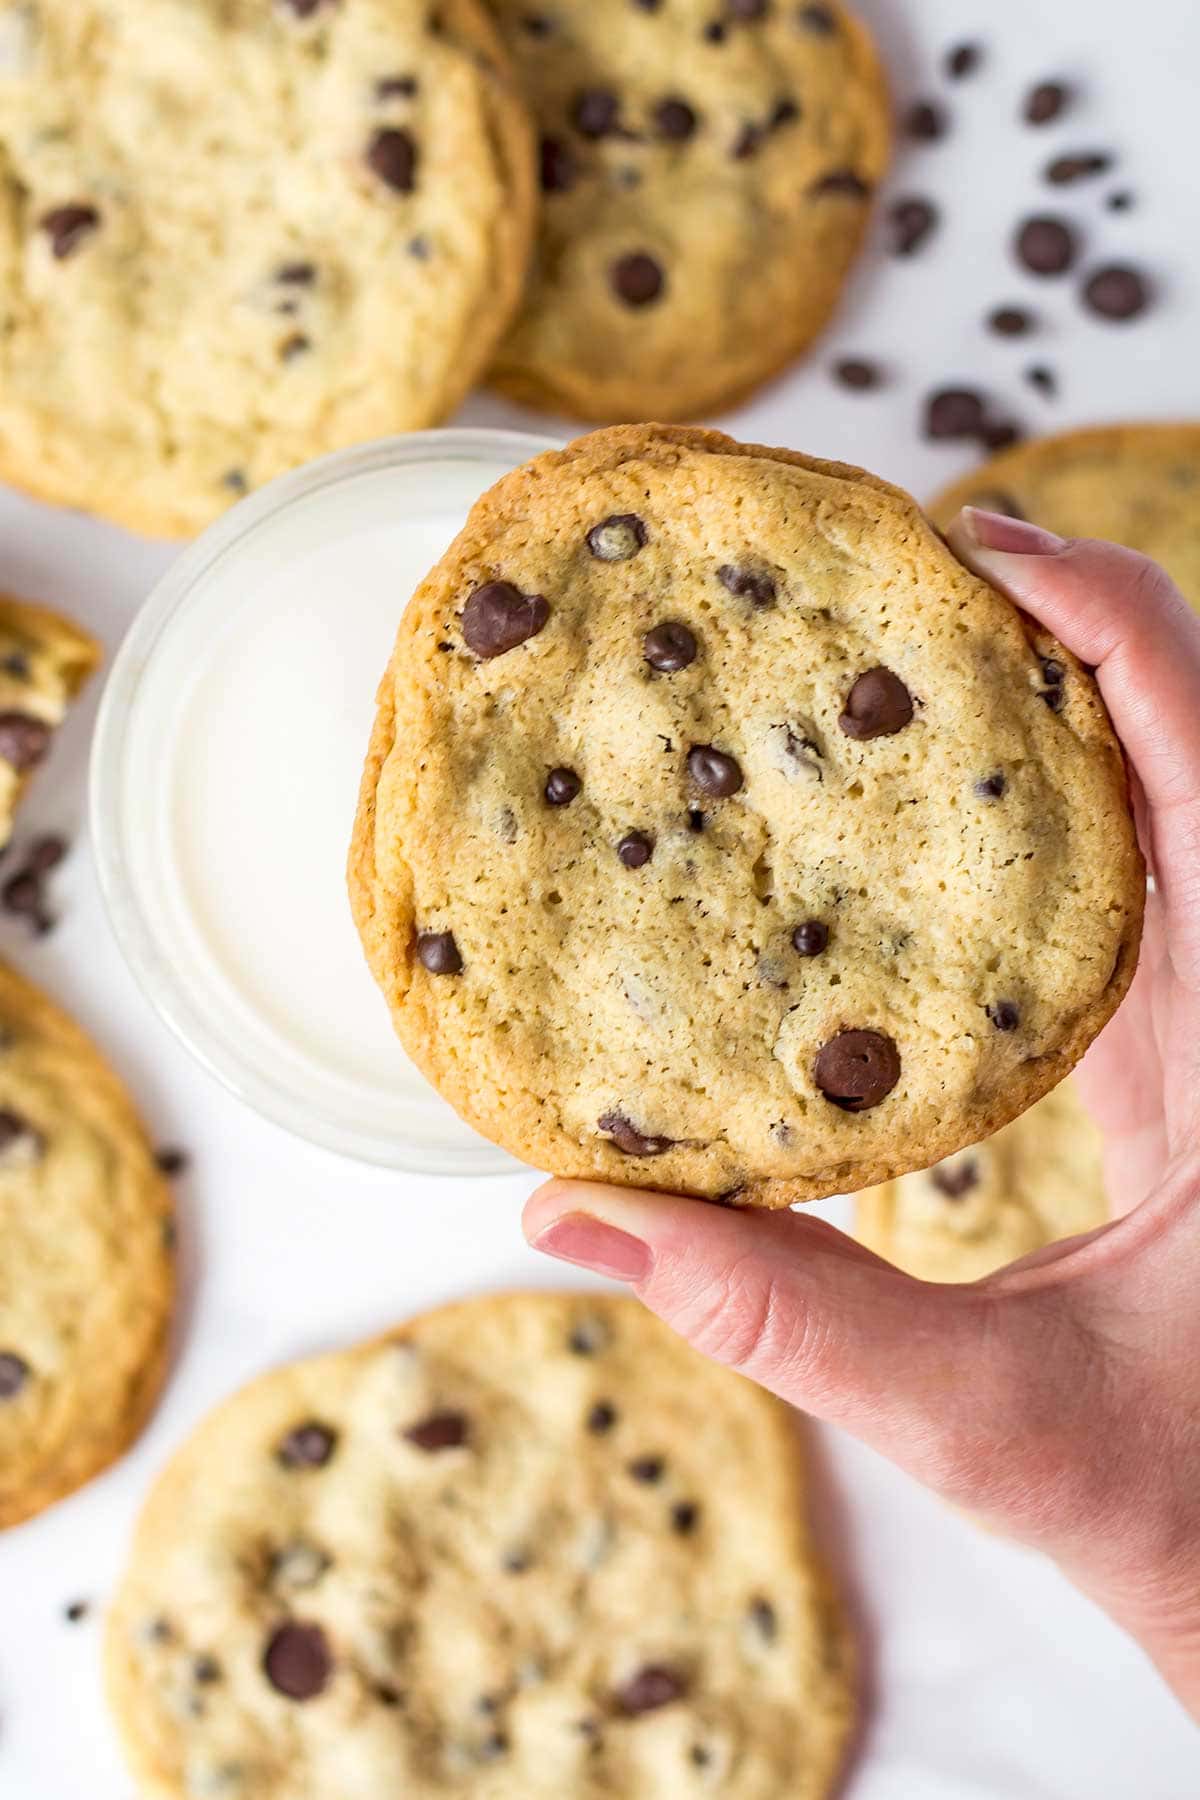 Soft Chocolate Chip cookie held by a hand over glass of milk